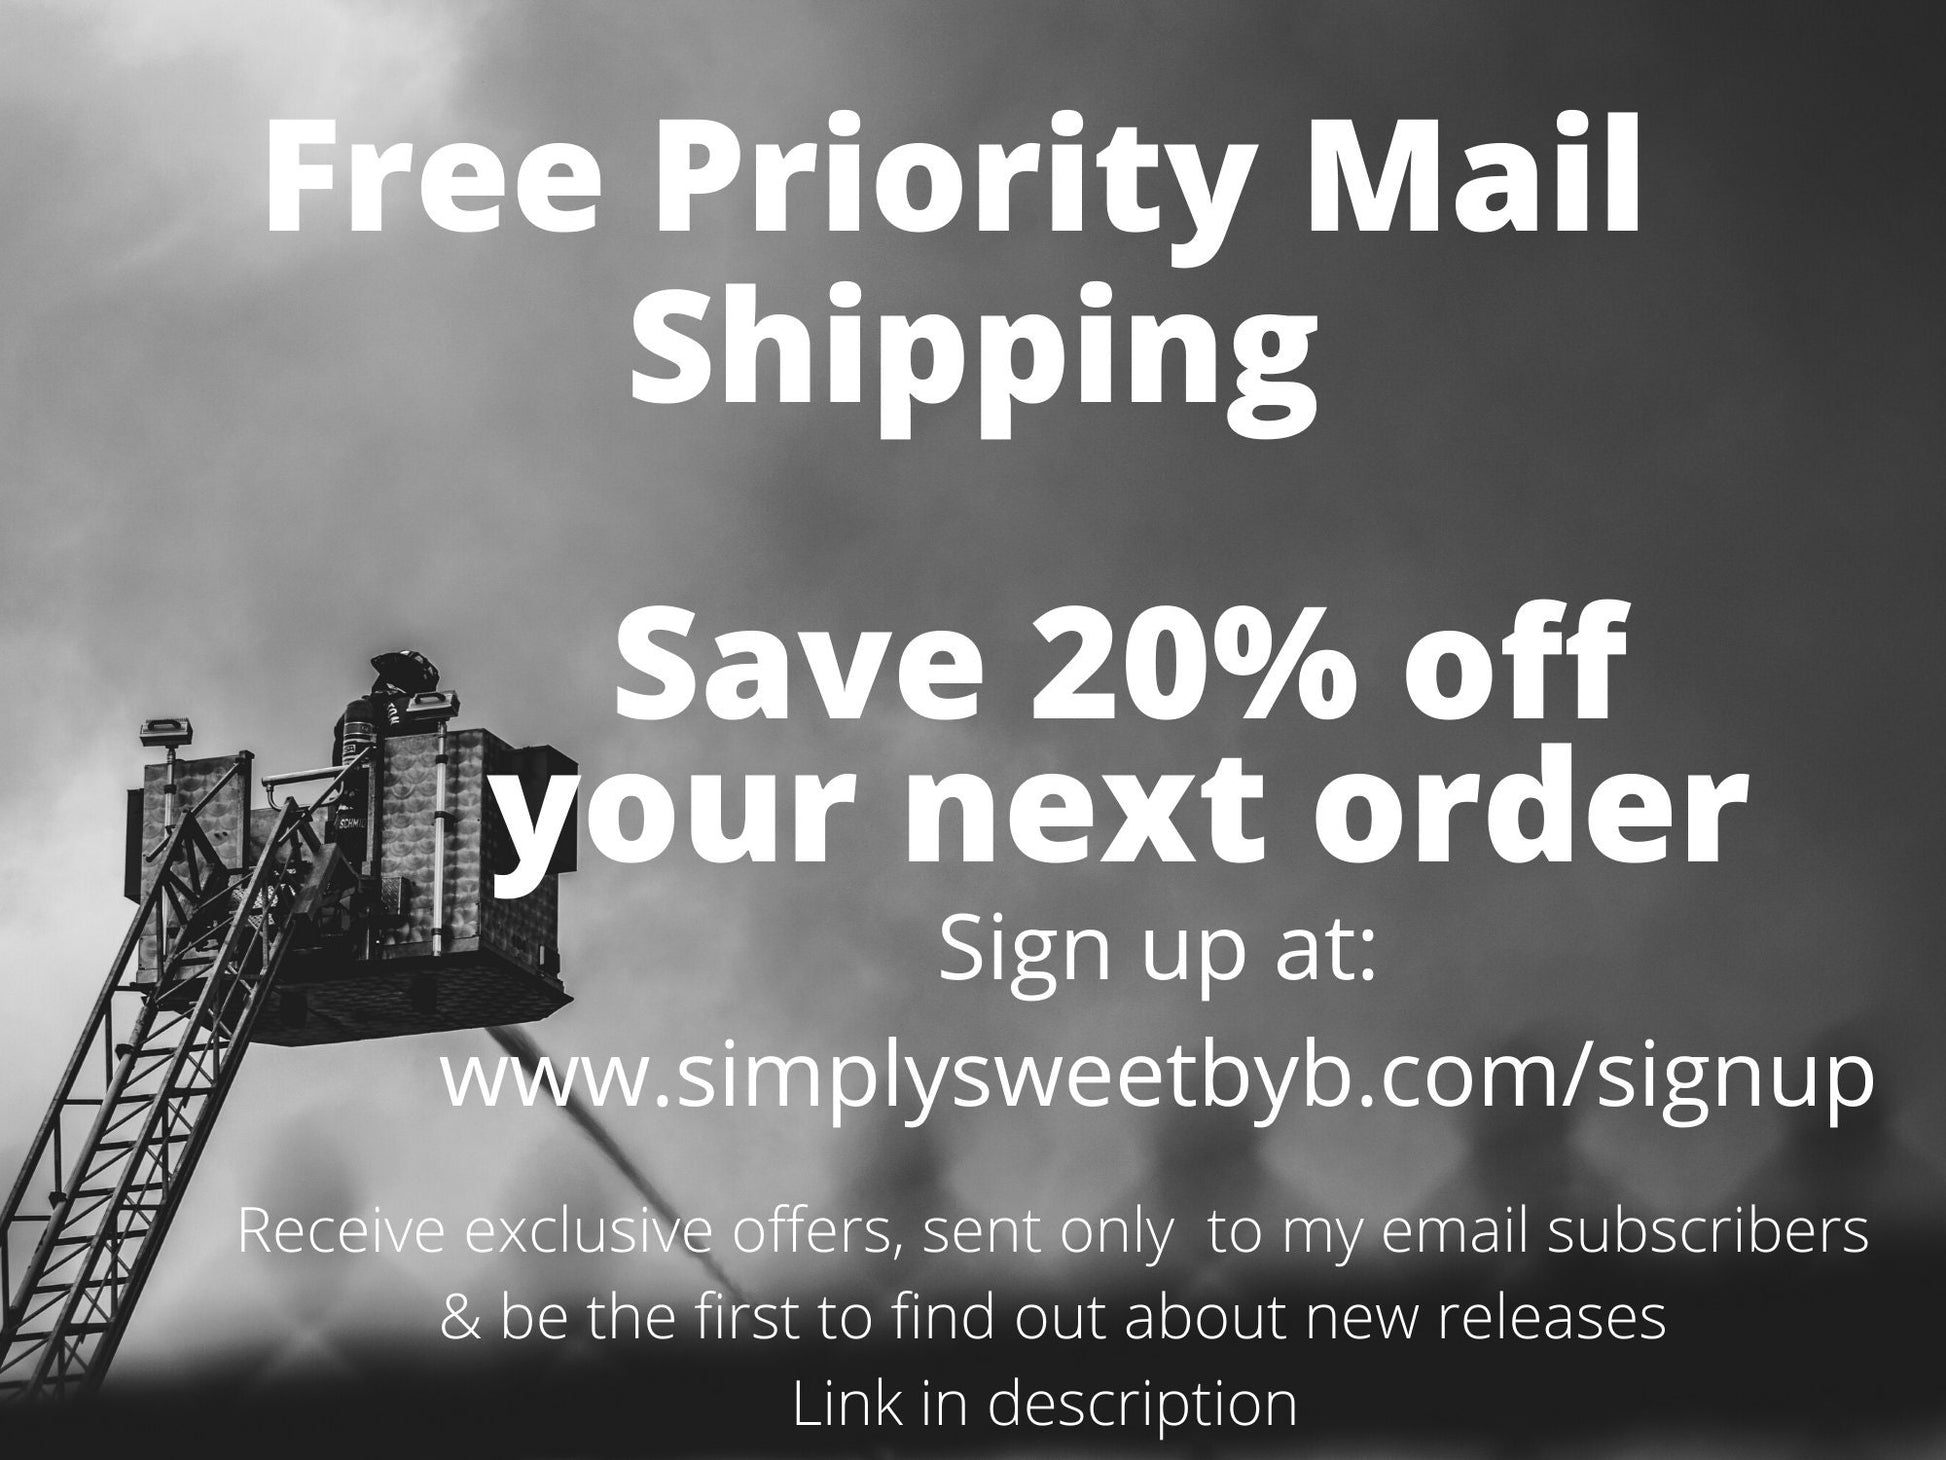 sign up for email list to receive 20% off now